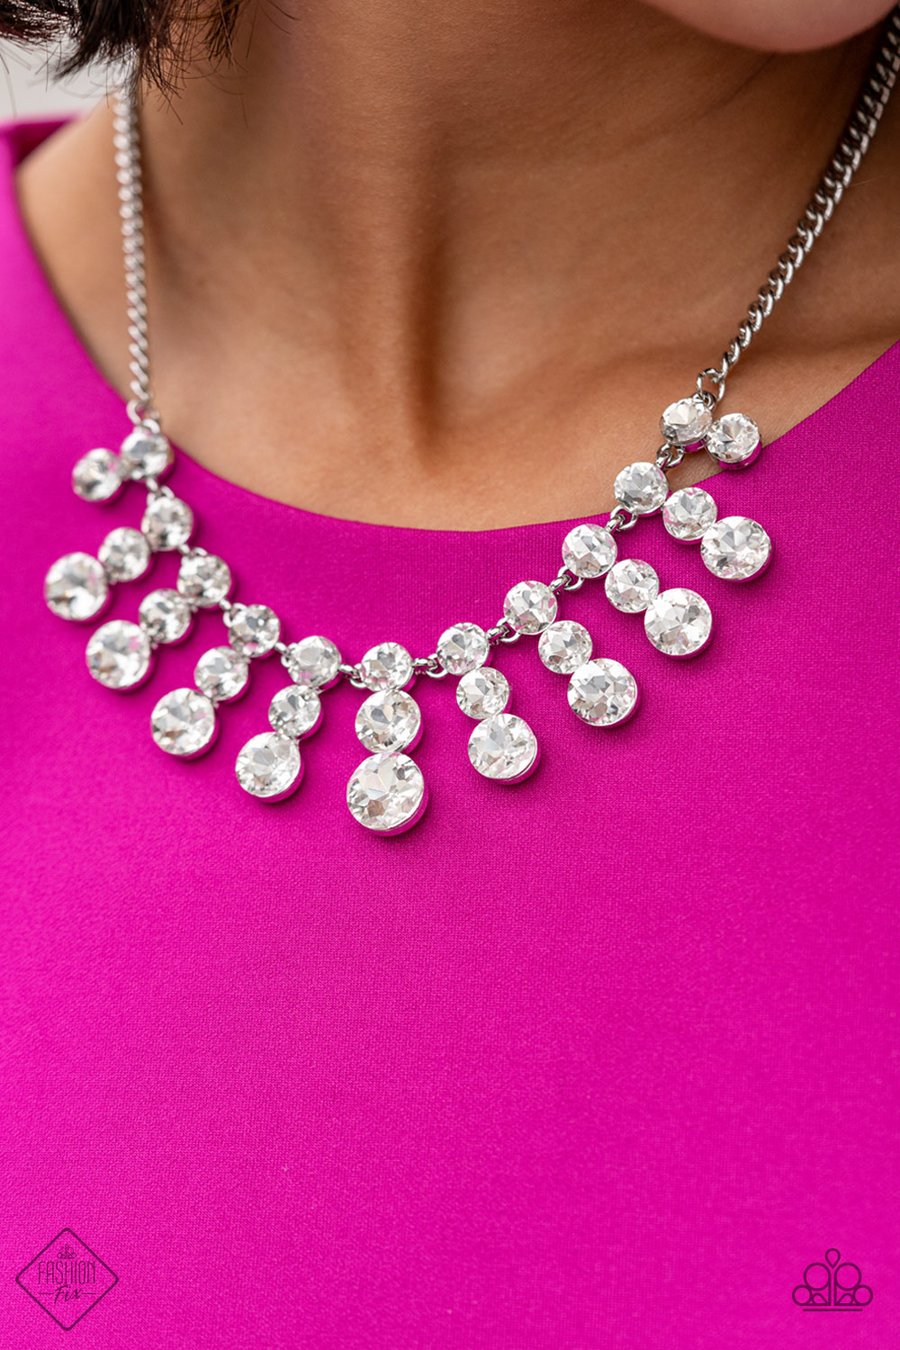 Paparazzi Accessories - Celebrity Couture - White (Bling) Necklace